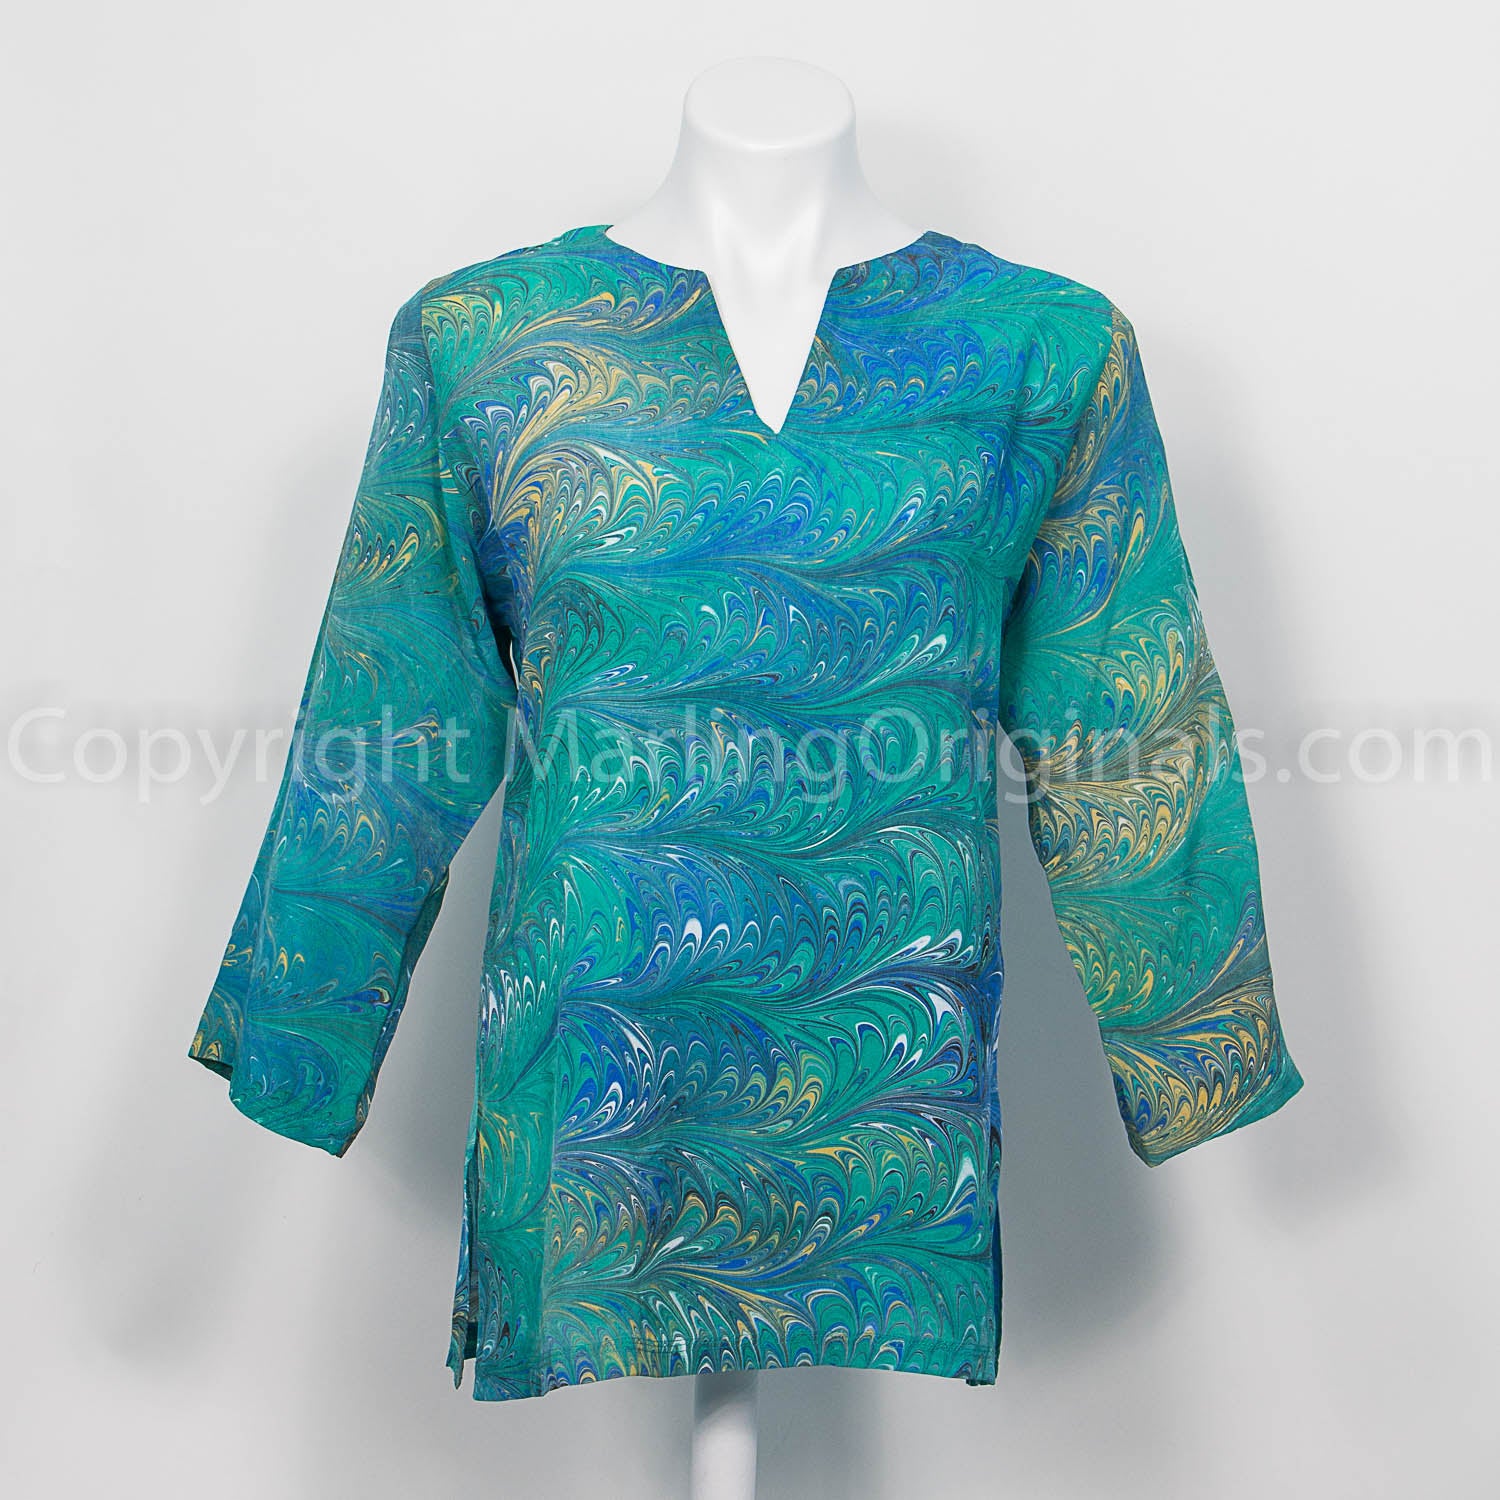 Silk tunic marbled in feathered pattern in greens, blues, yellow, white. 3/4 sleeve, notched neck.